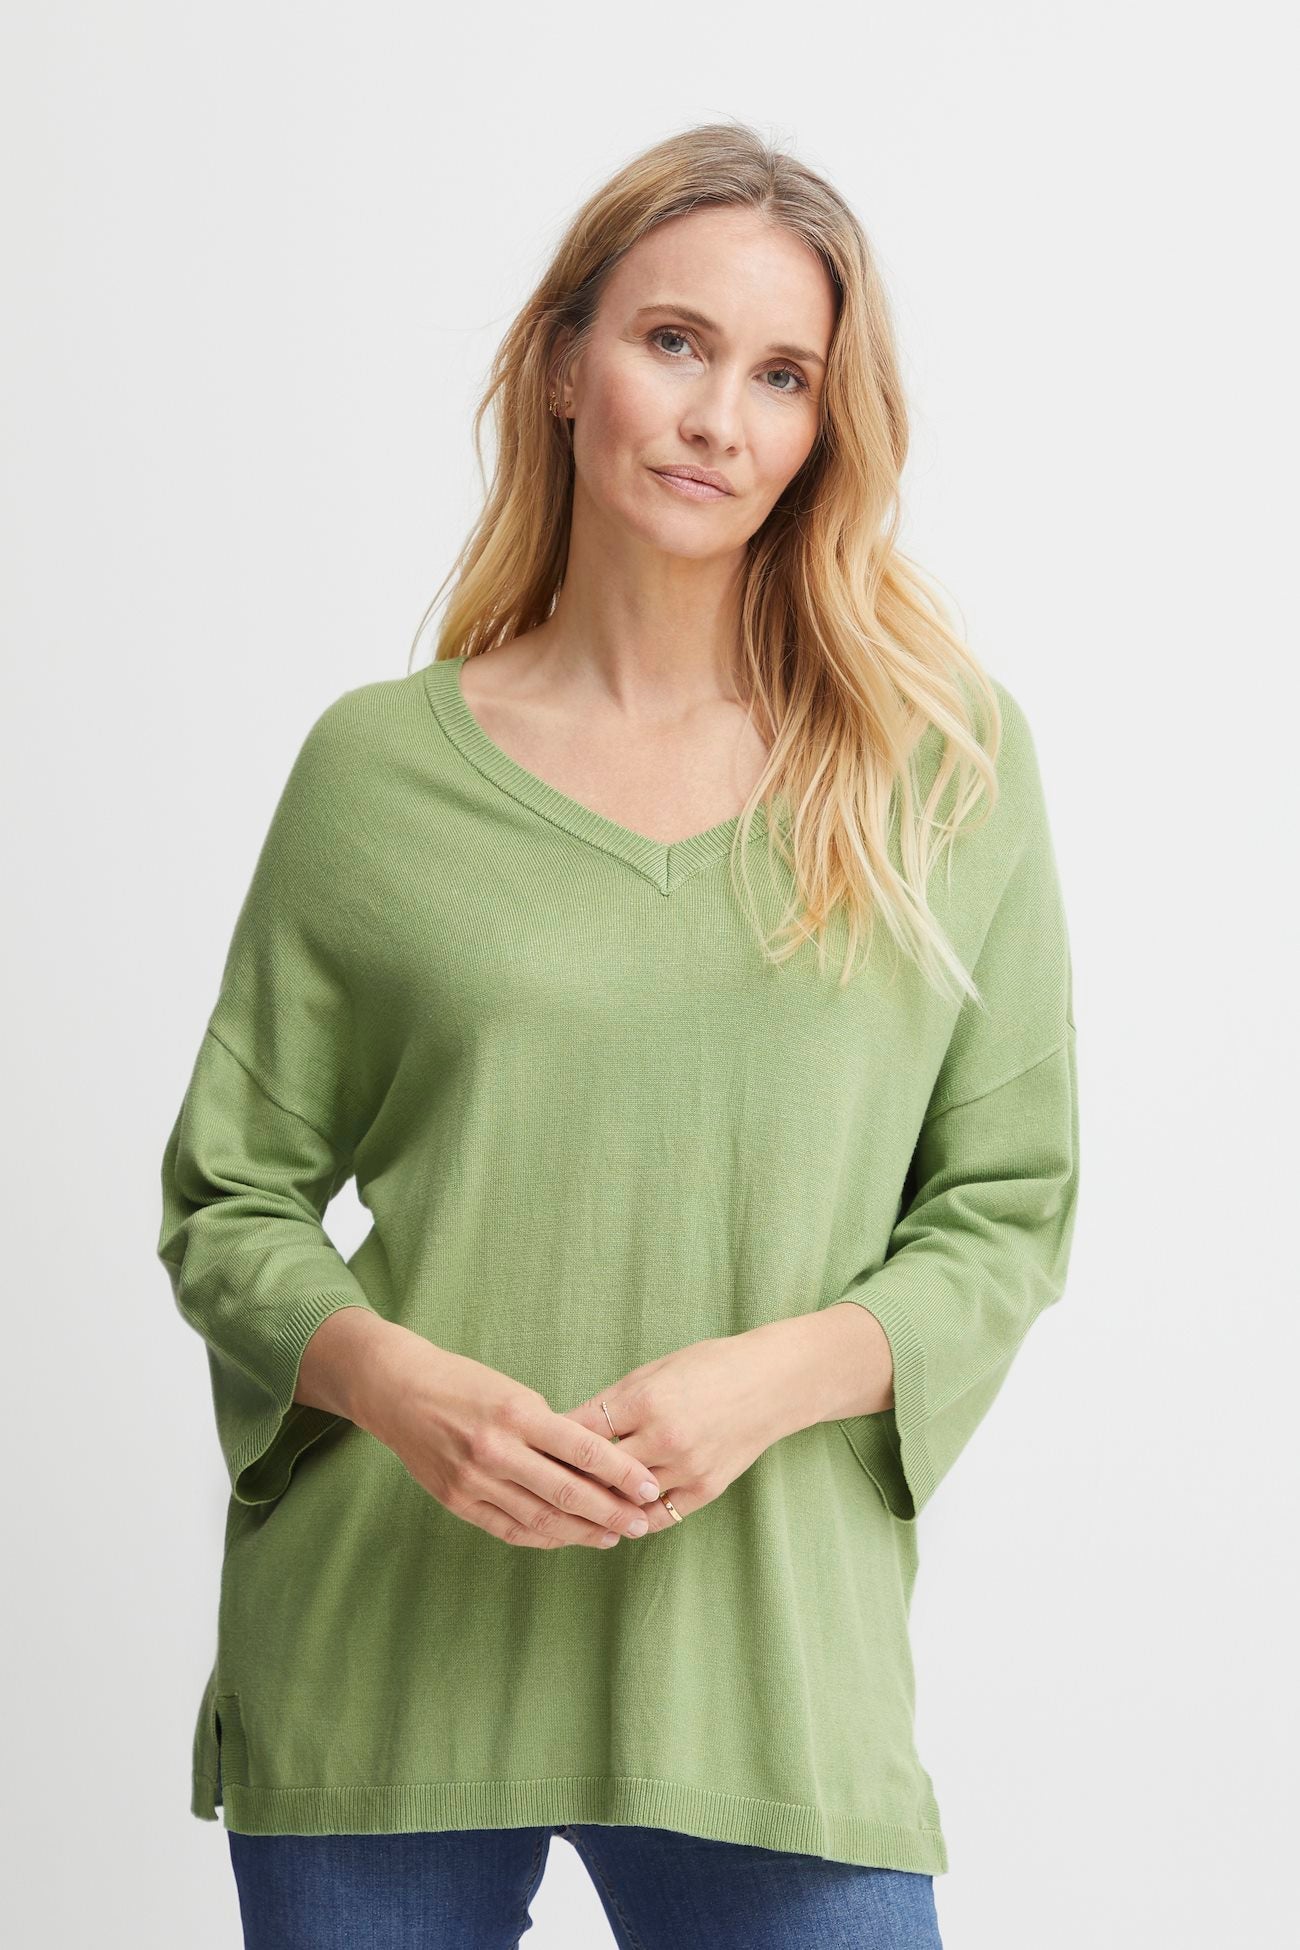 Blume Pullover - Forest Shade - Blue Sky Clothing & Lingerie